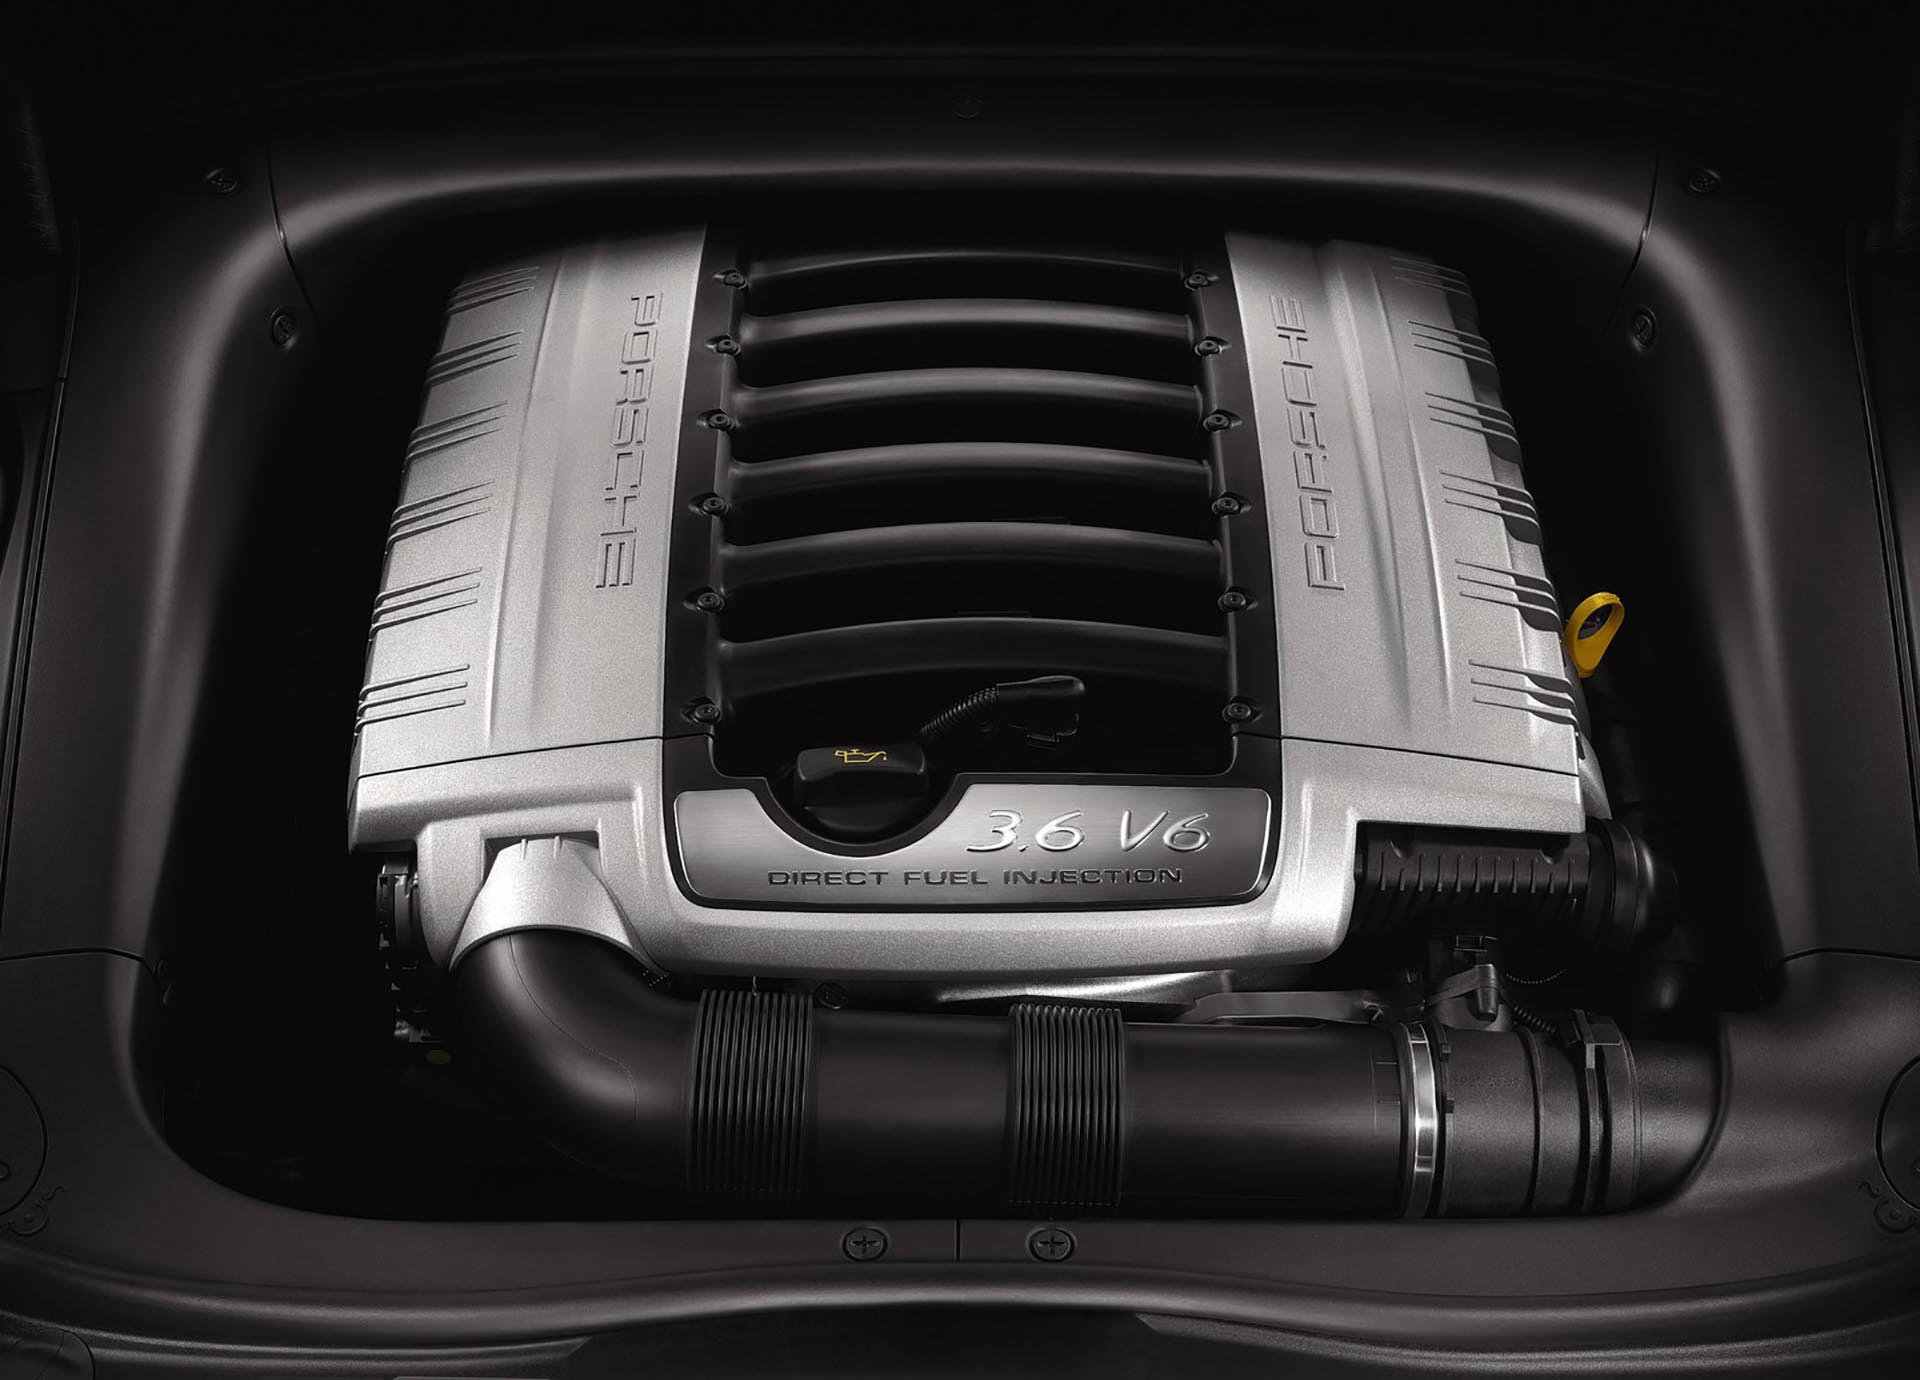 The Definitive Guide To First-Generation Porsche Cayenne Engine